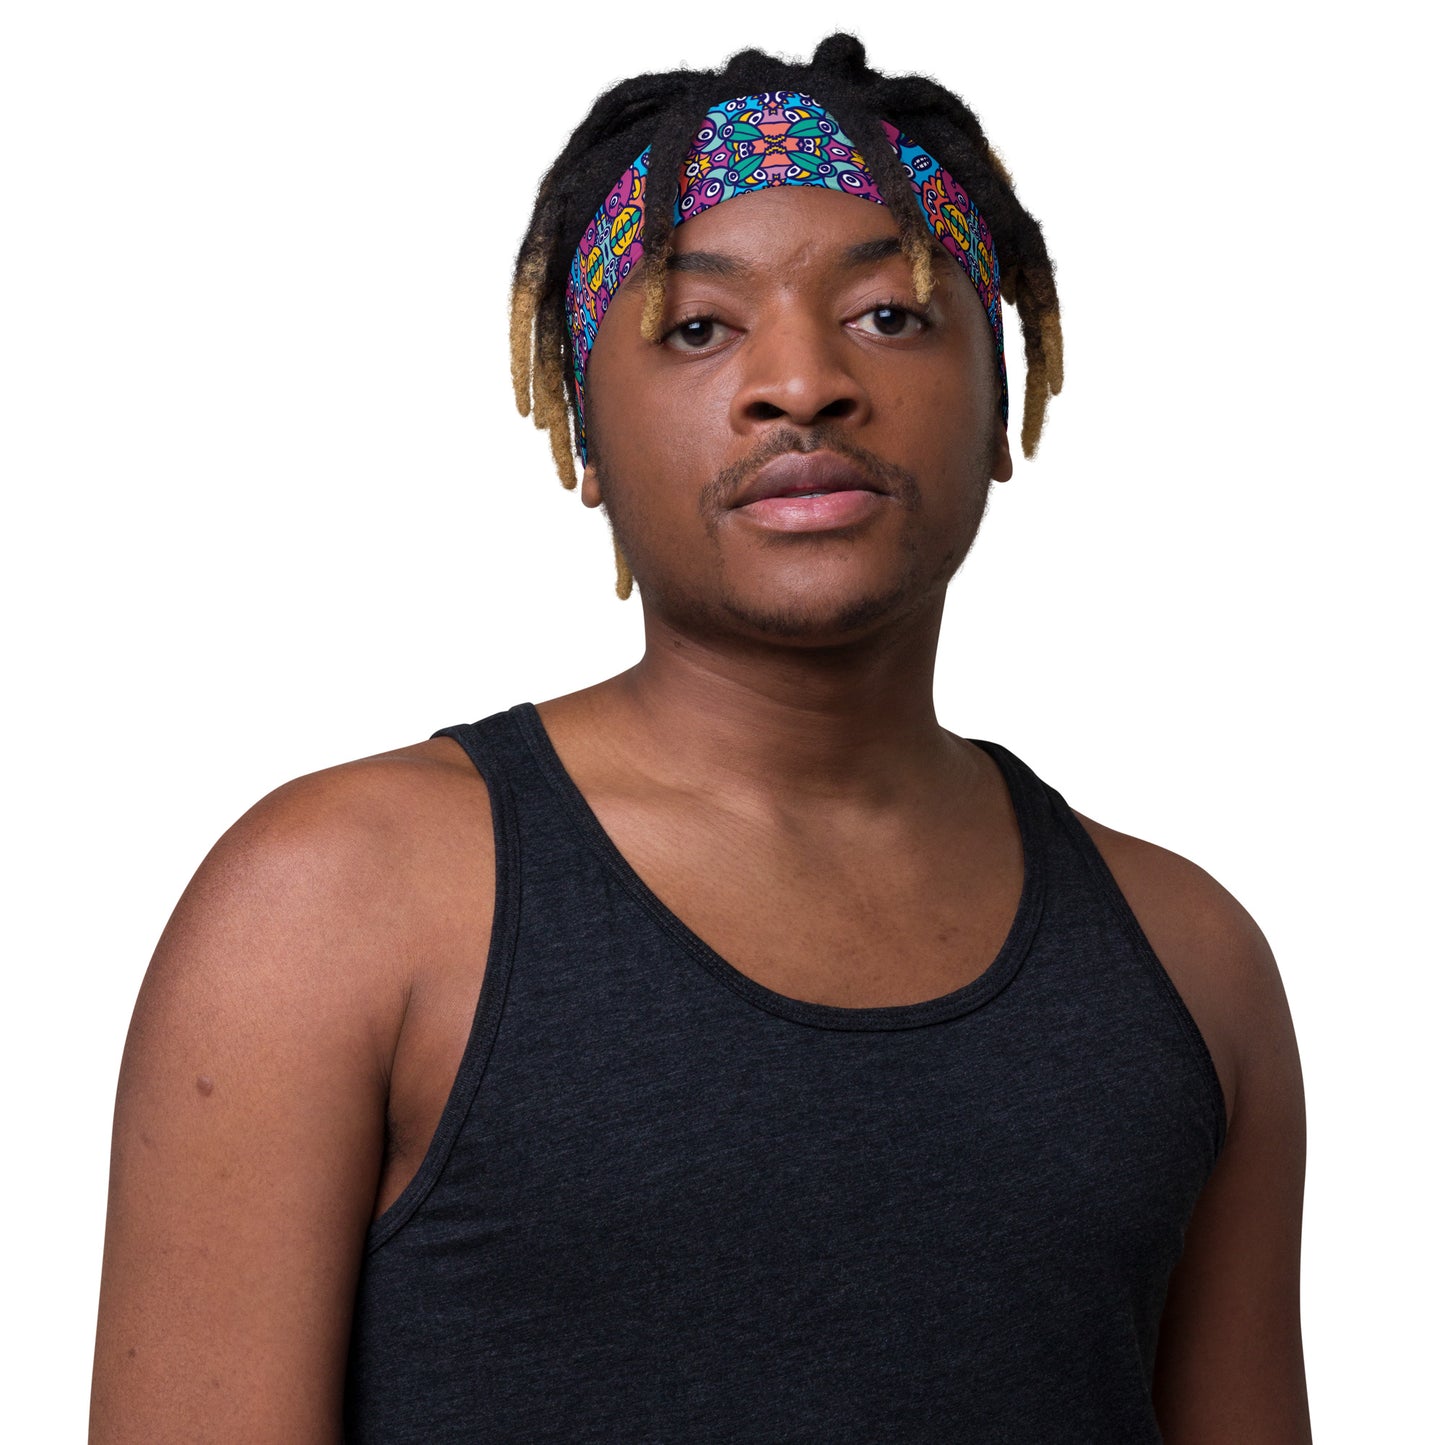 Cool man wearing Headband All-over printed with Whimsical design featuring multicolor critters from another world